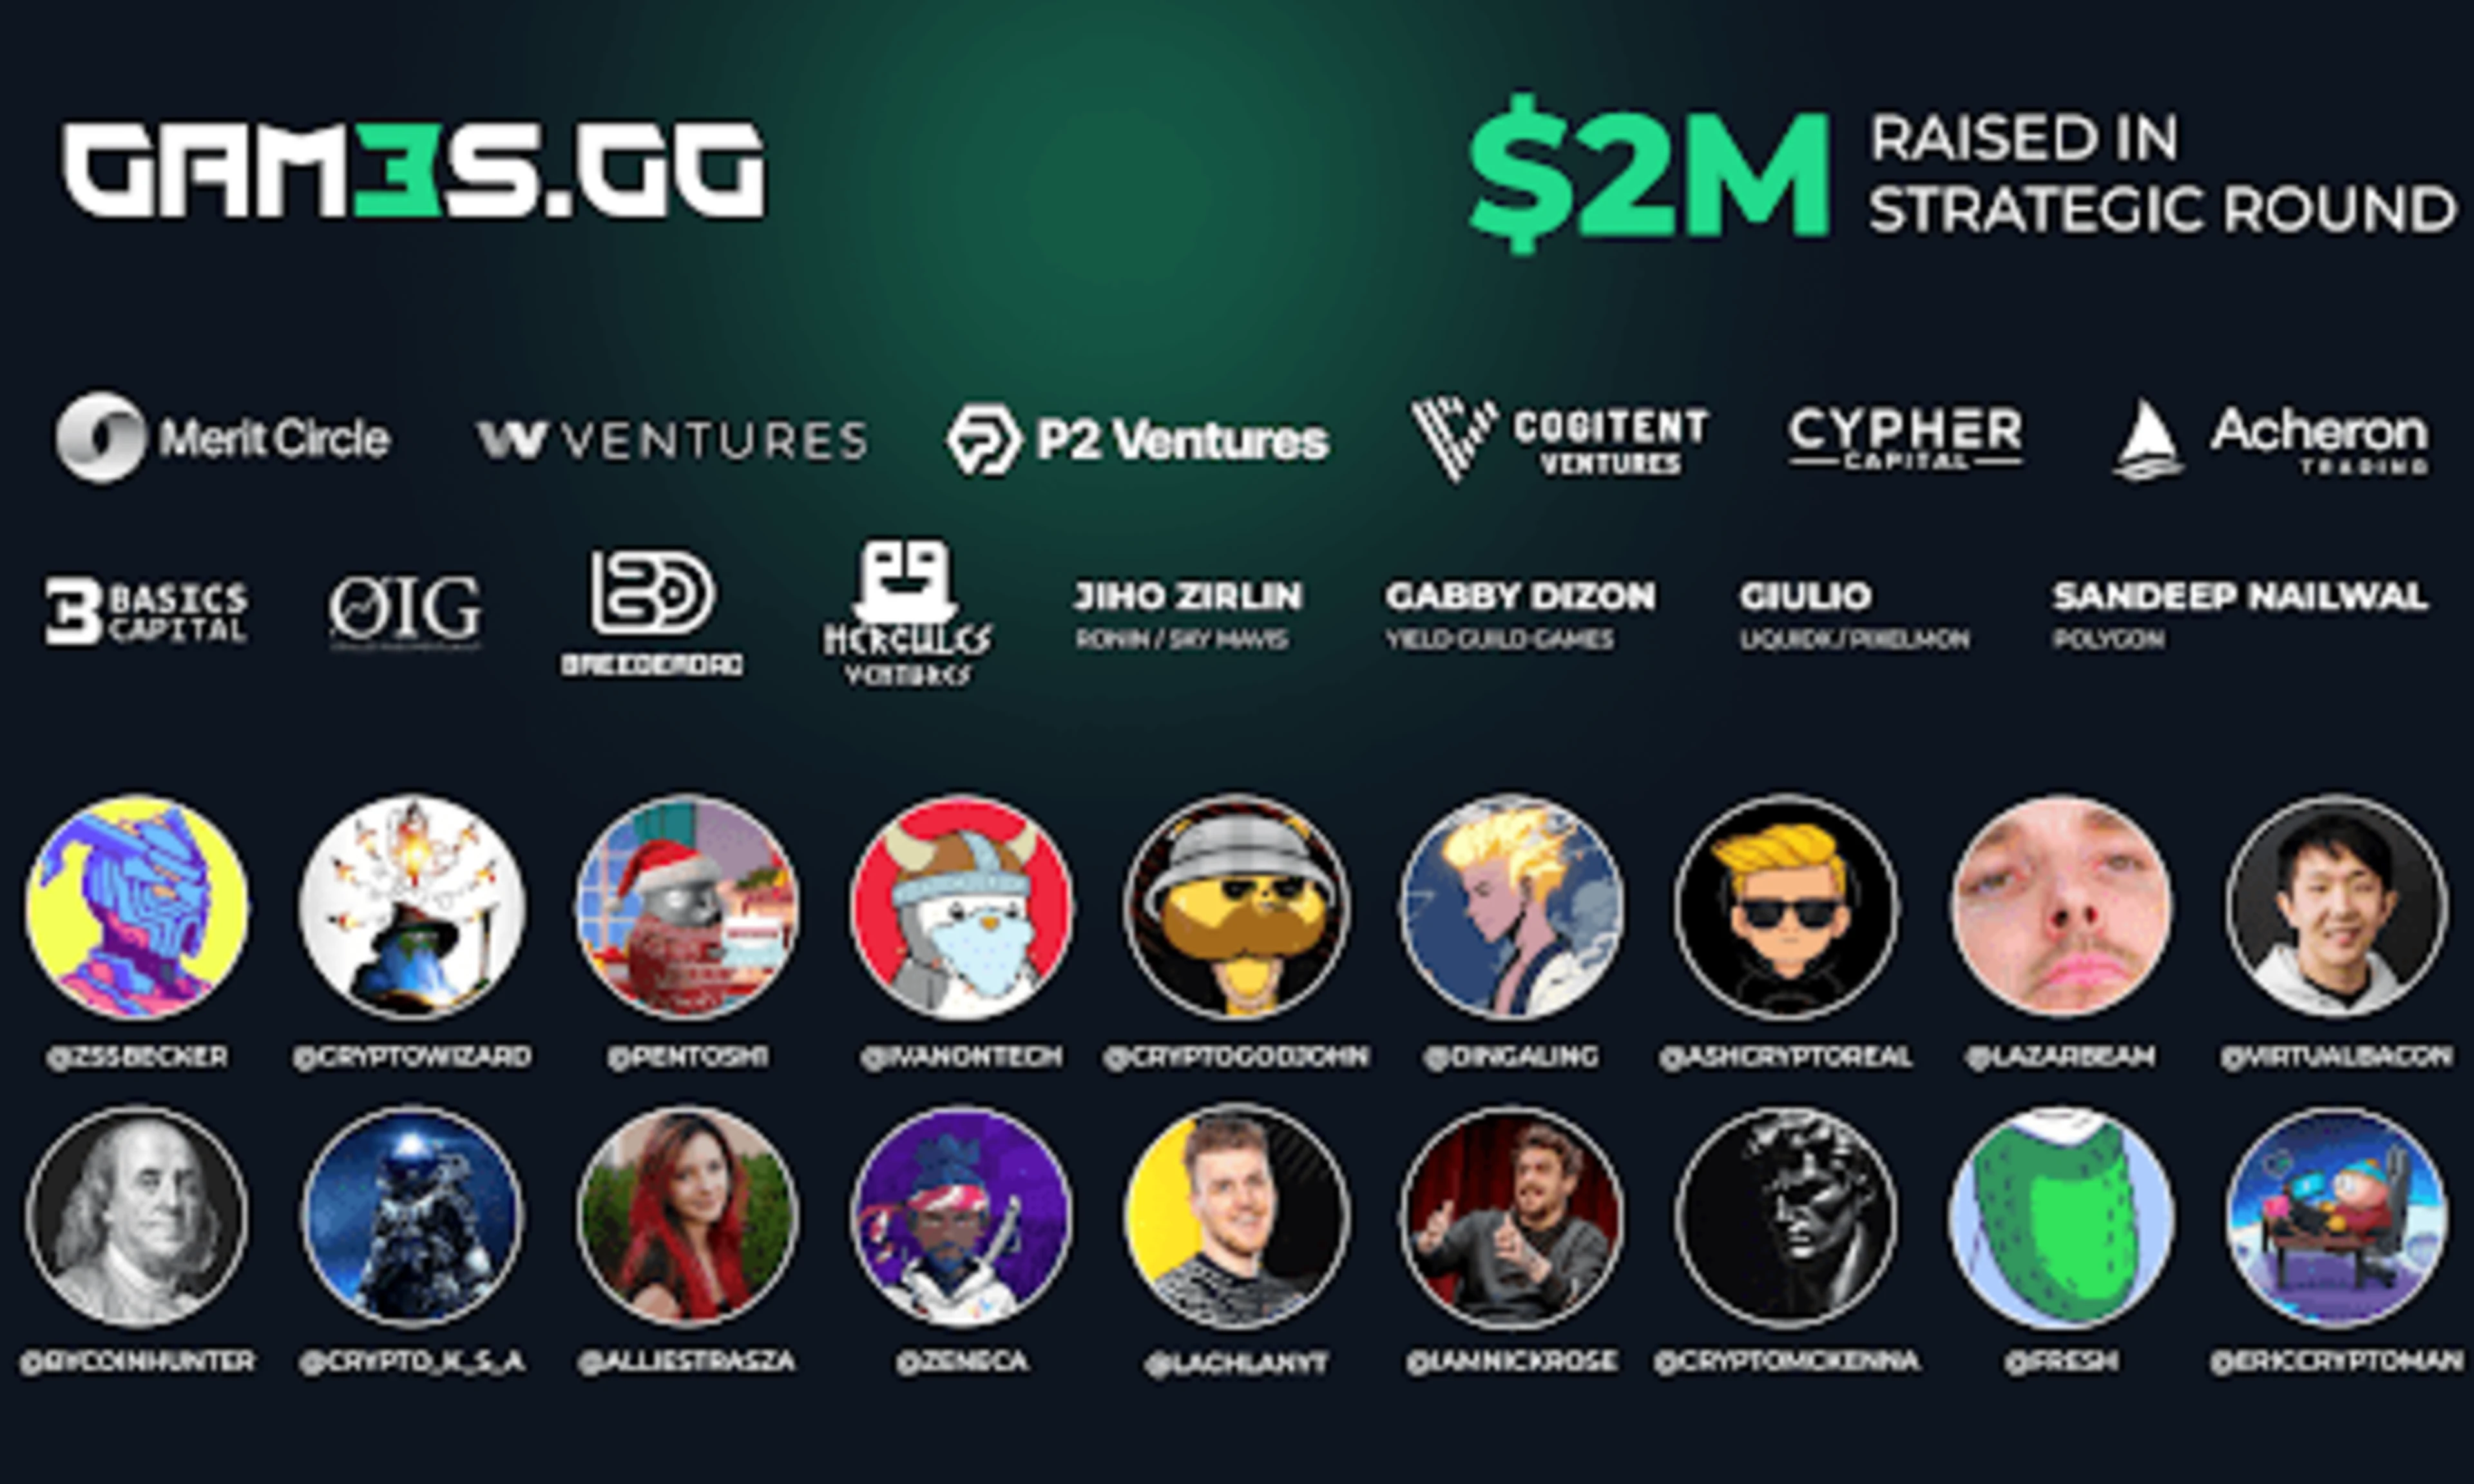 GAM3S.GG Secures $2M Funding Round Ahead of G3 Token Launch